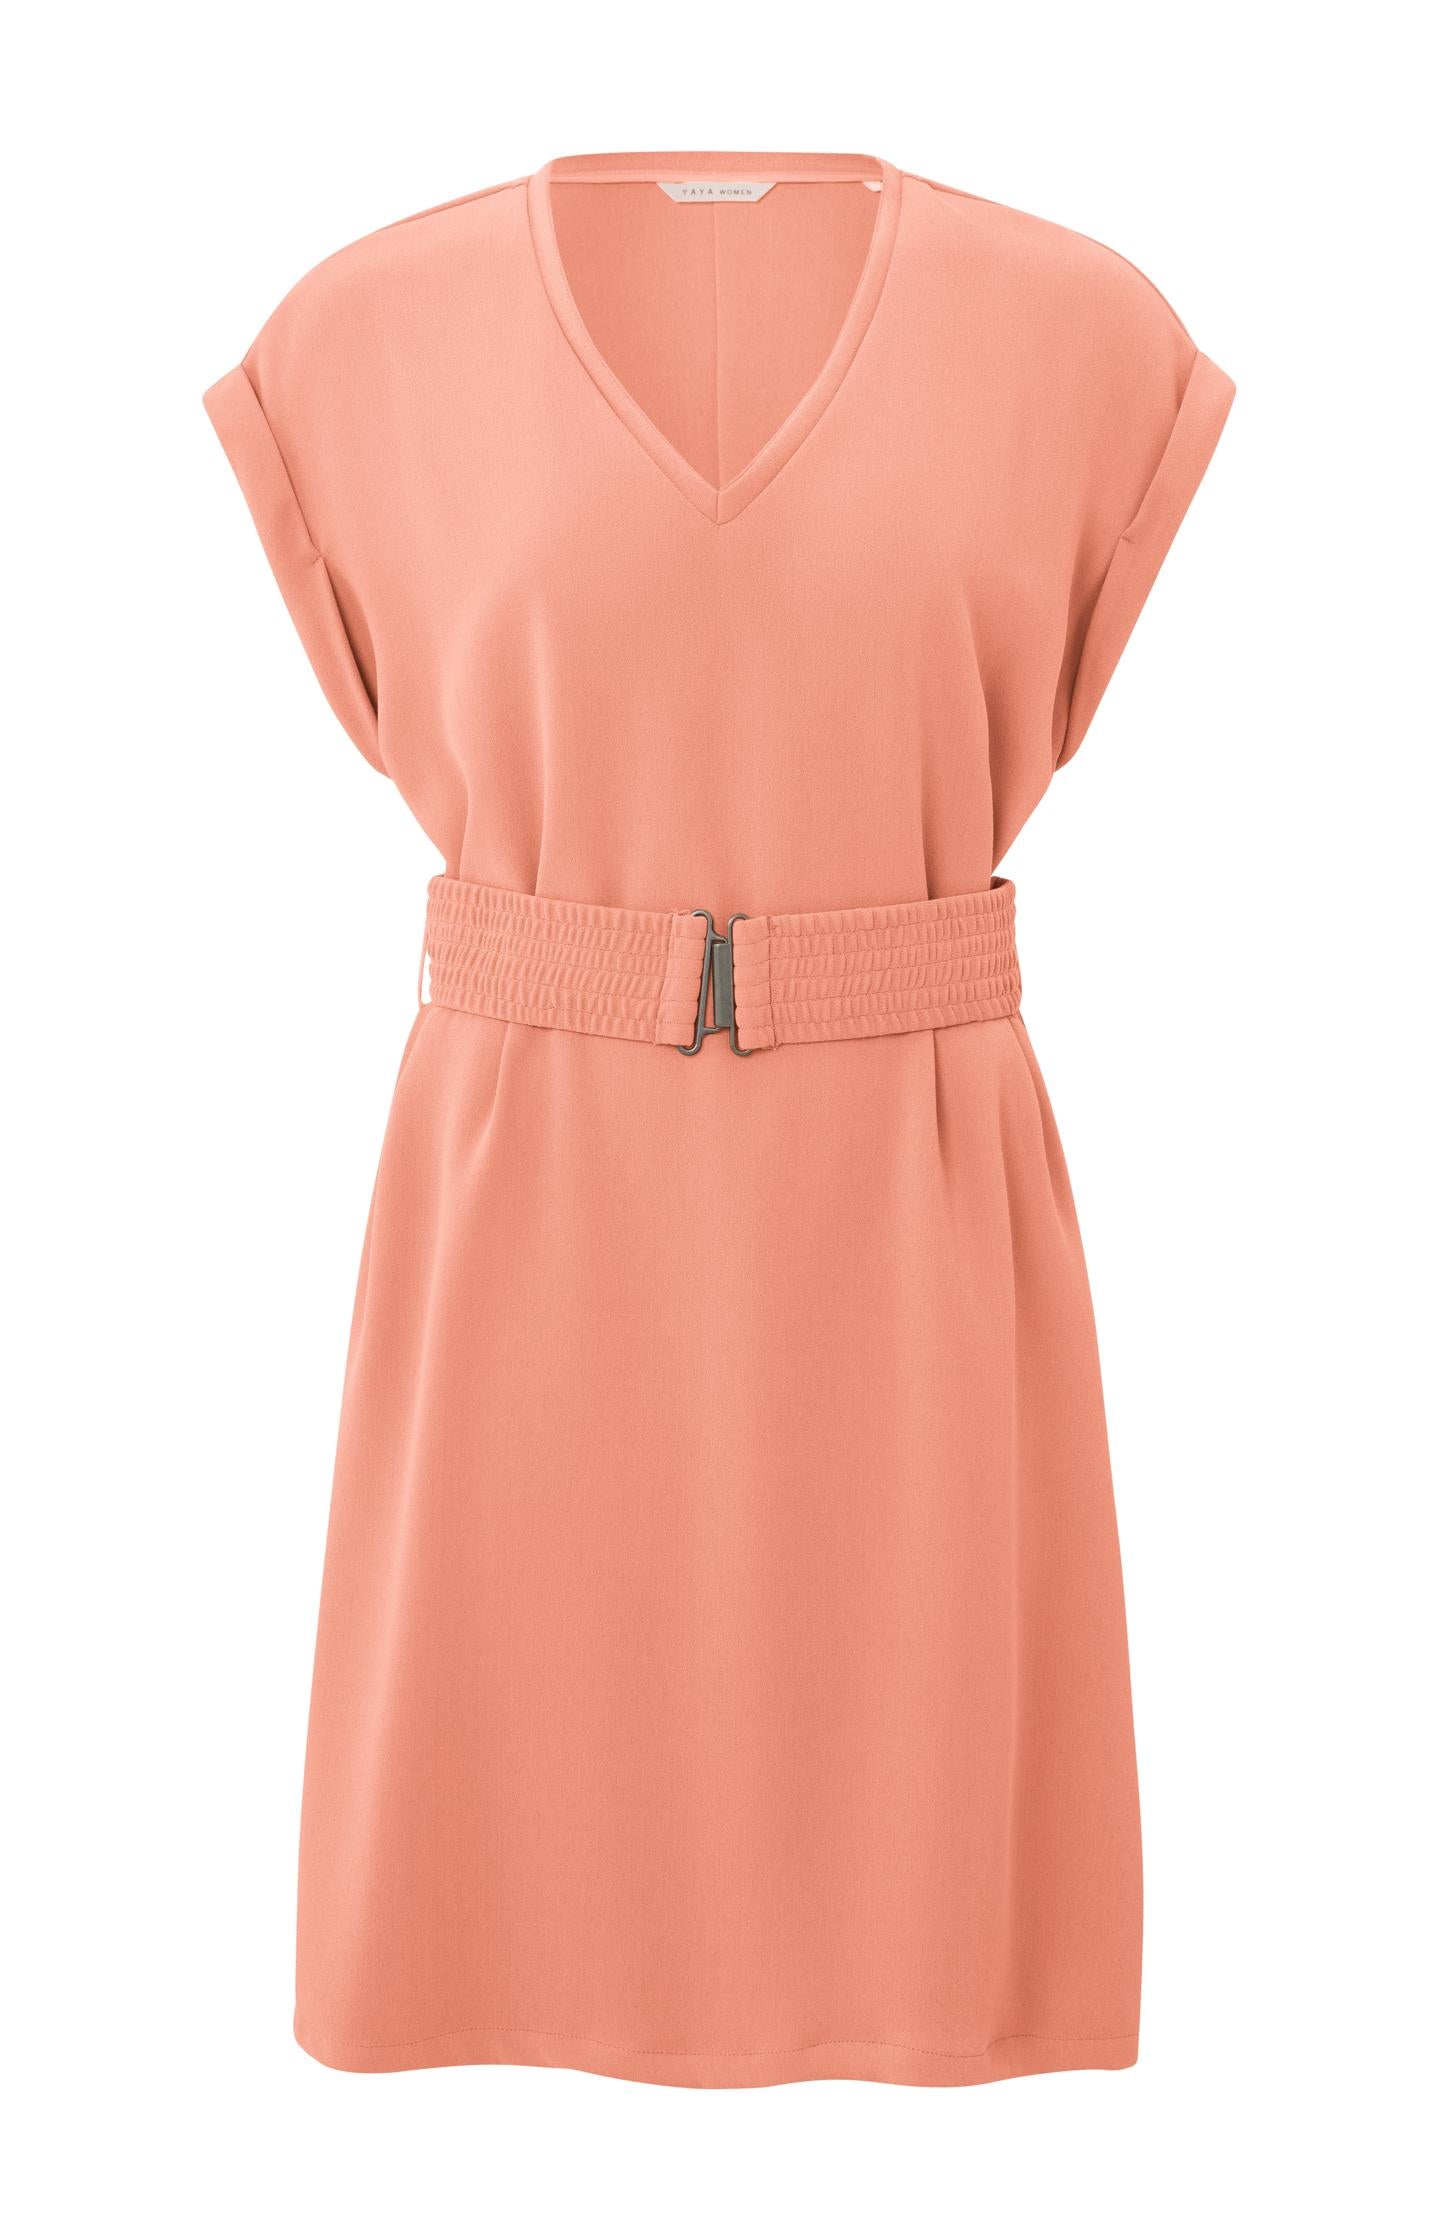 Dress with V-neck, short sleeves and detailed belt - Type: product